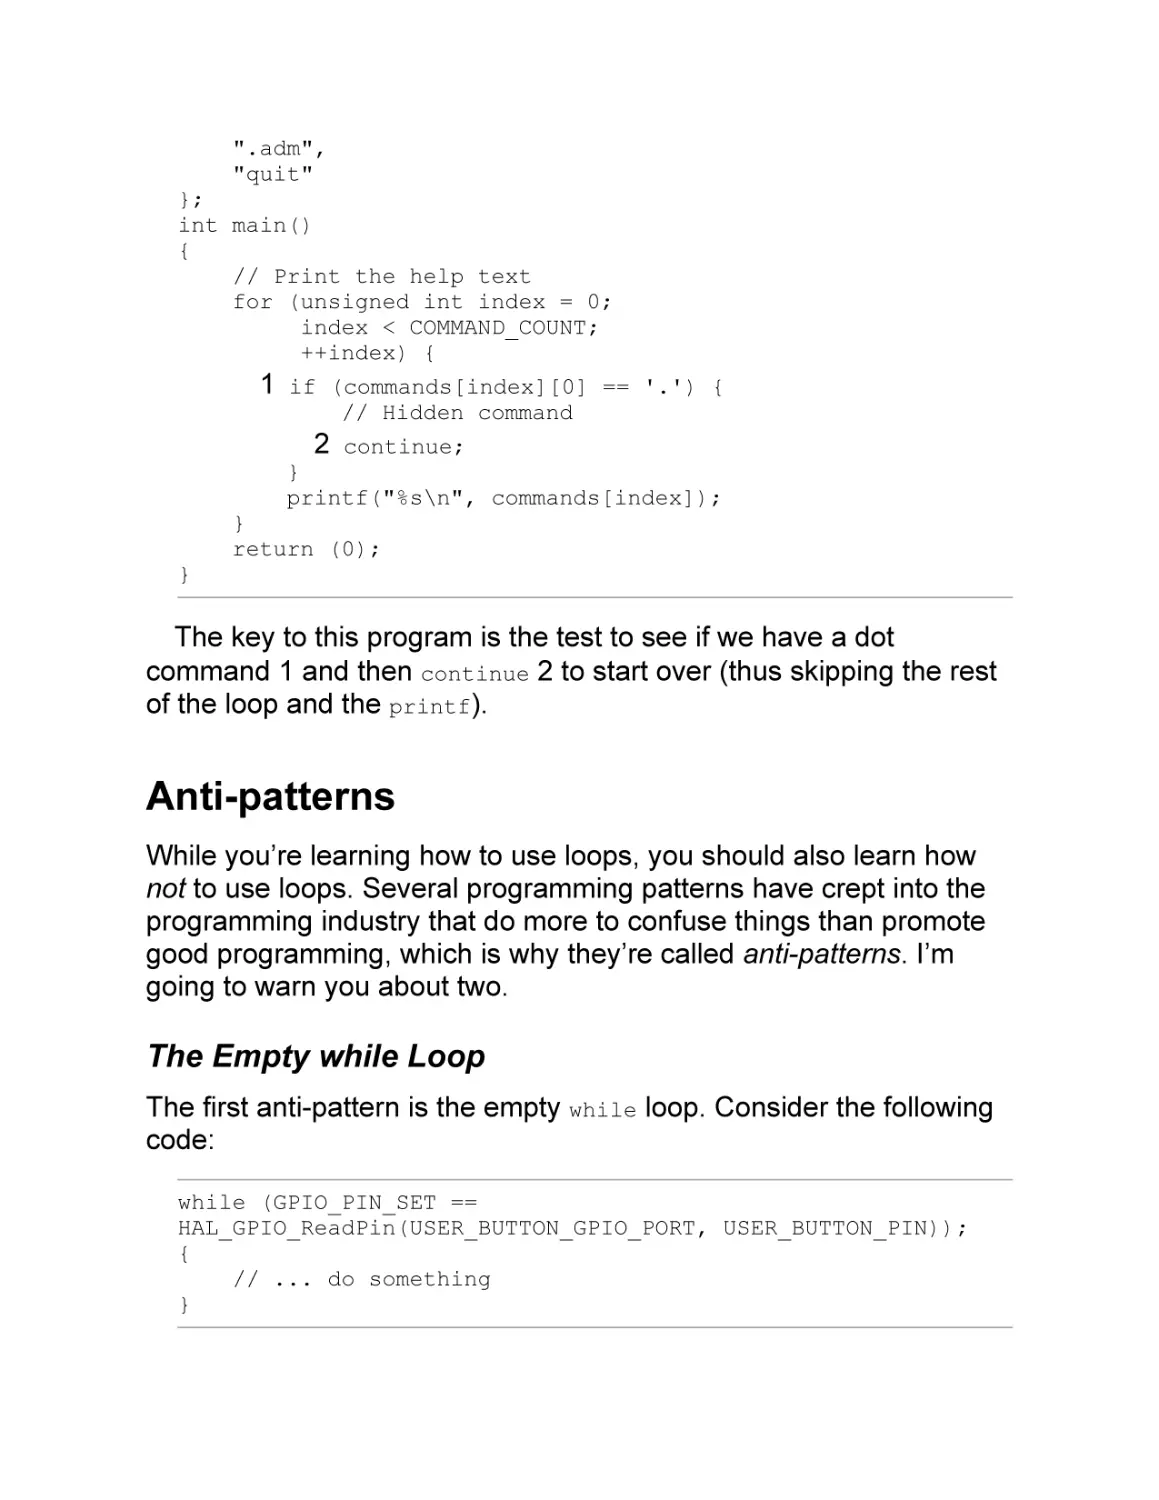 Anti-patterns
The Empty while Loop